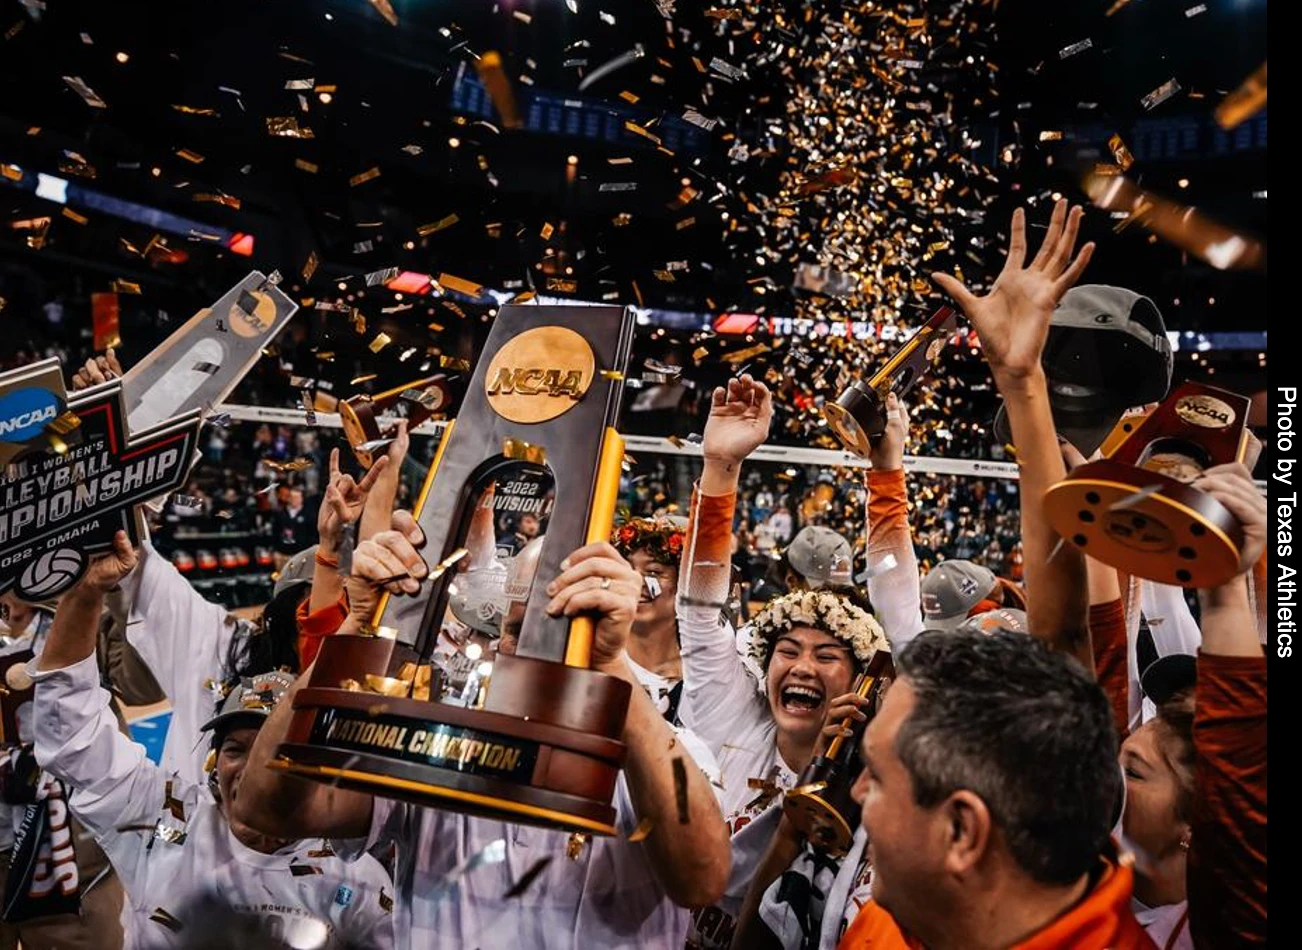 Texas celebrates winning the NCAA Volleyball National Championships 2022